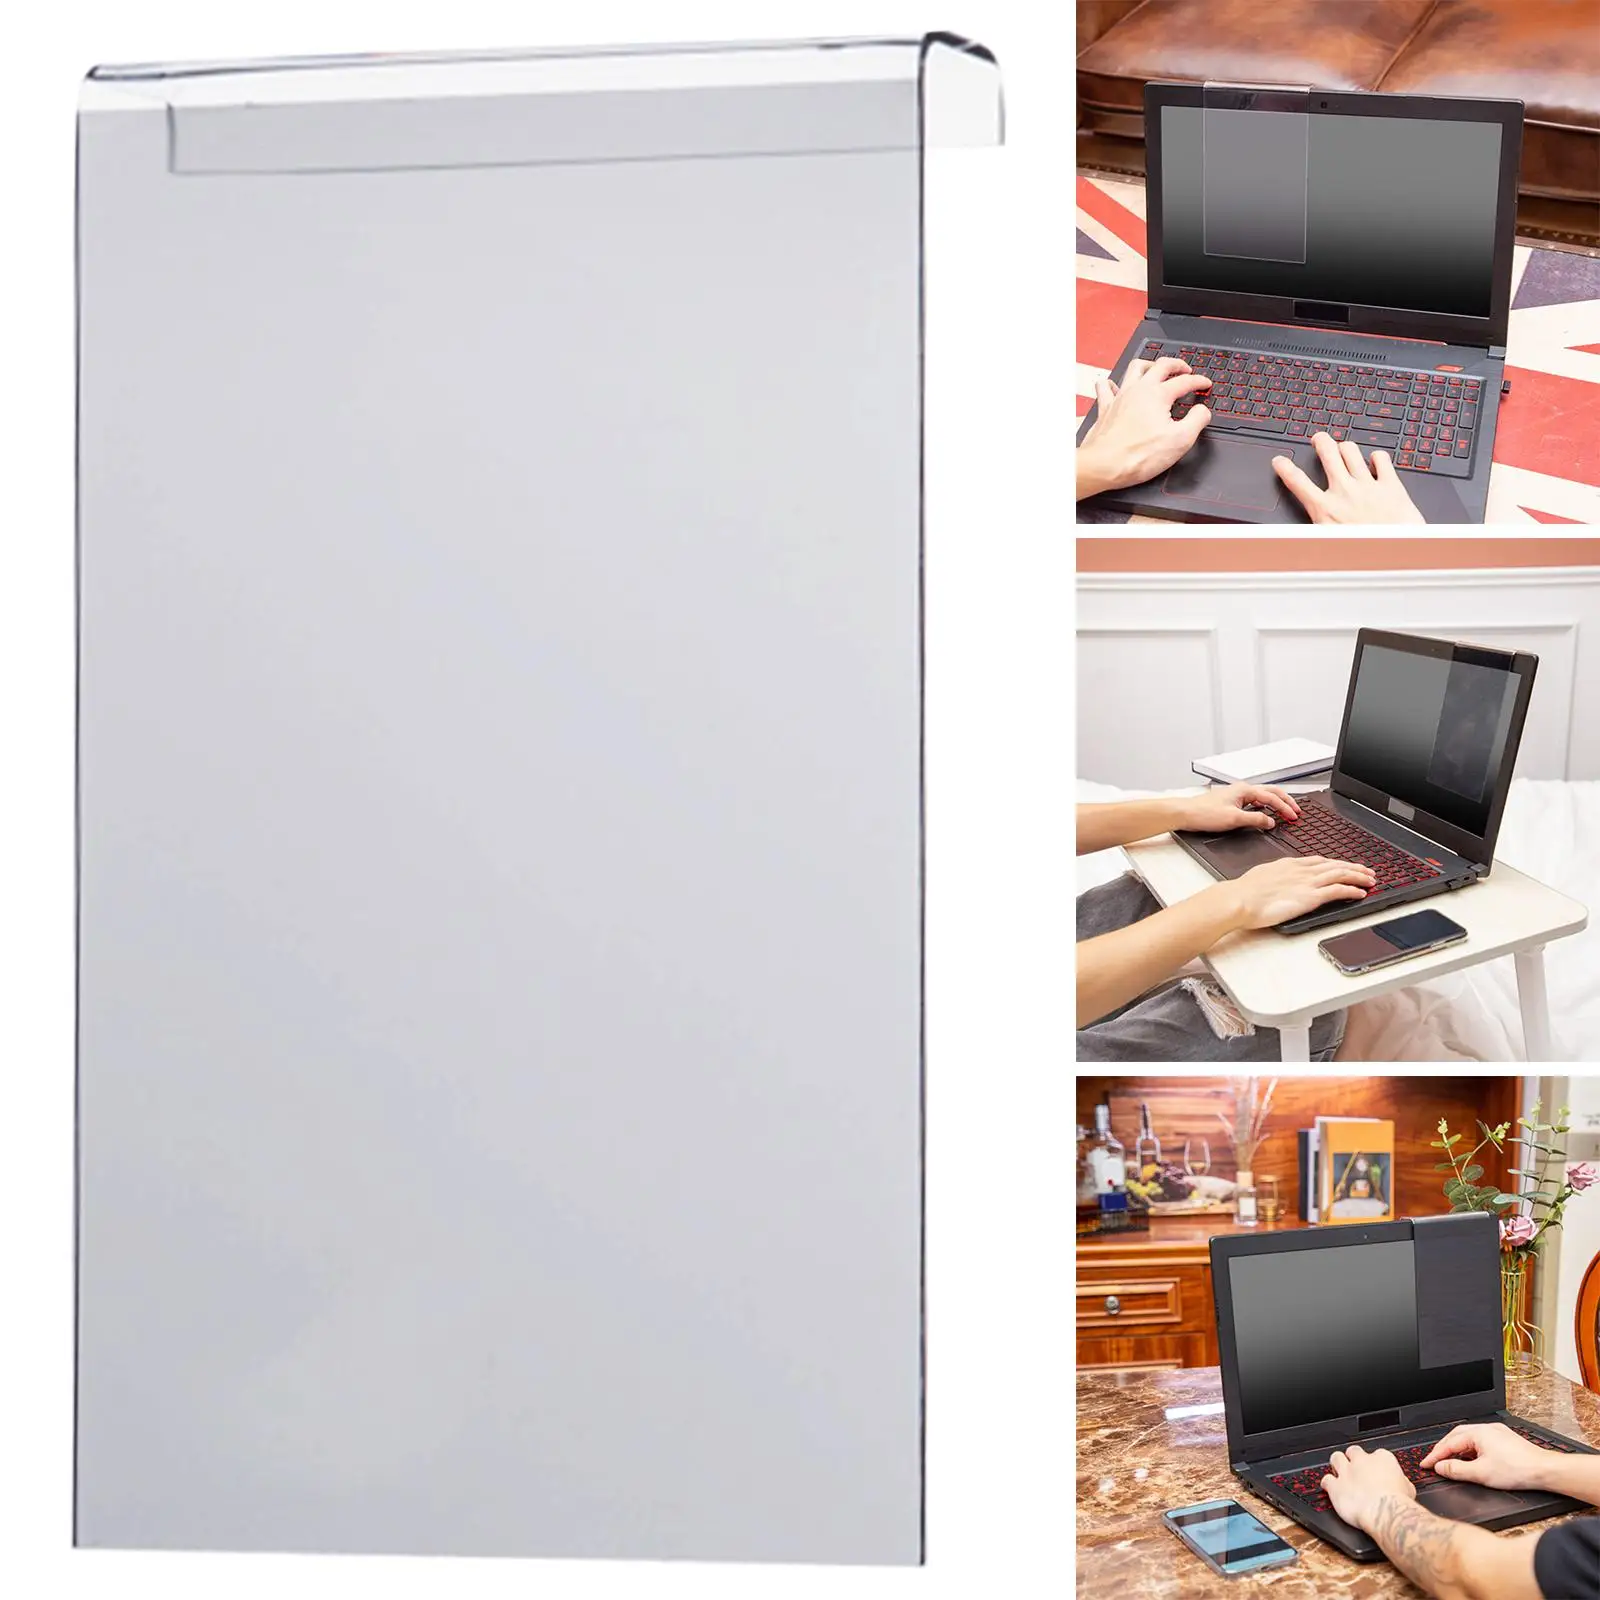 Privacy Filter Screen Protector Oil Resistant 7 Inch for Computers Tablets